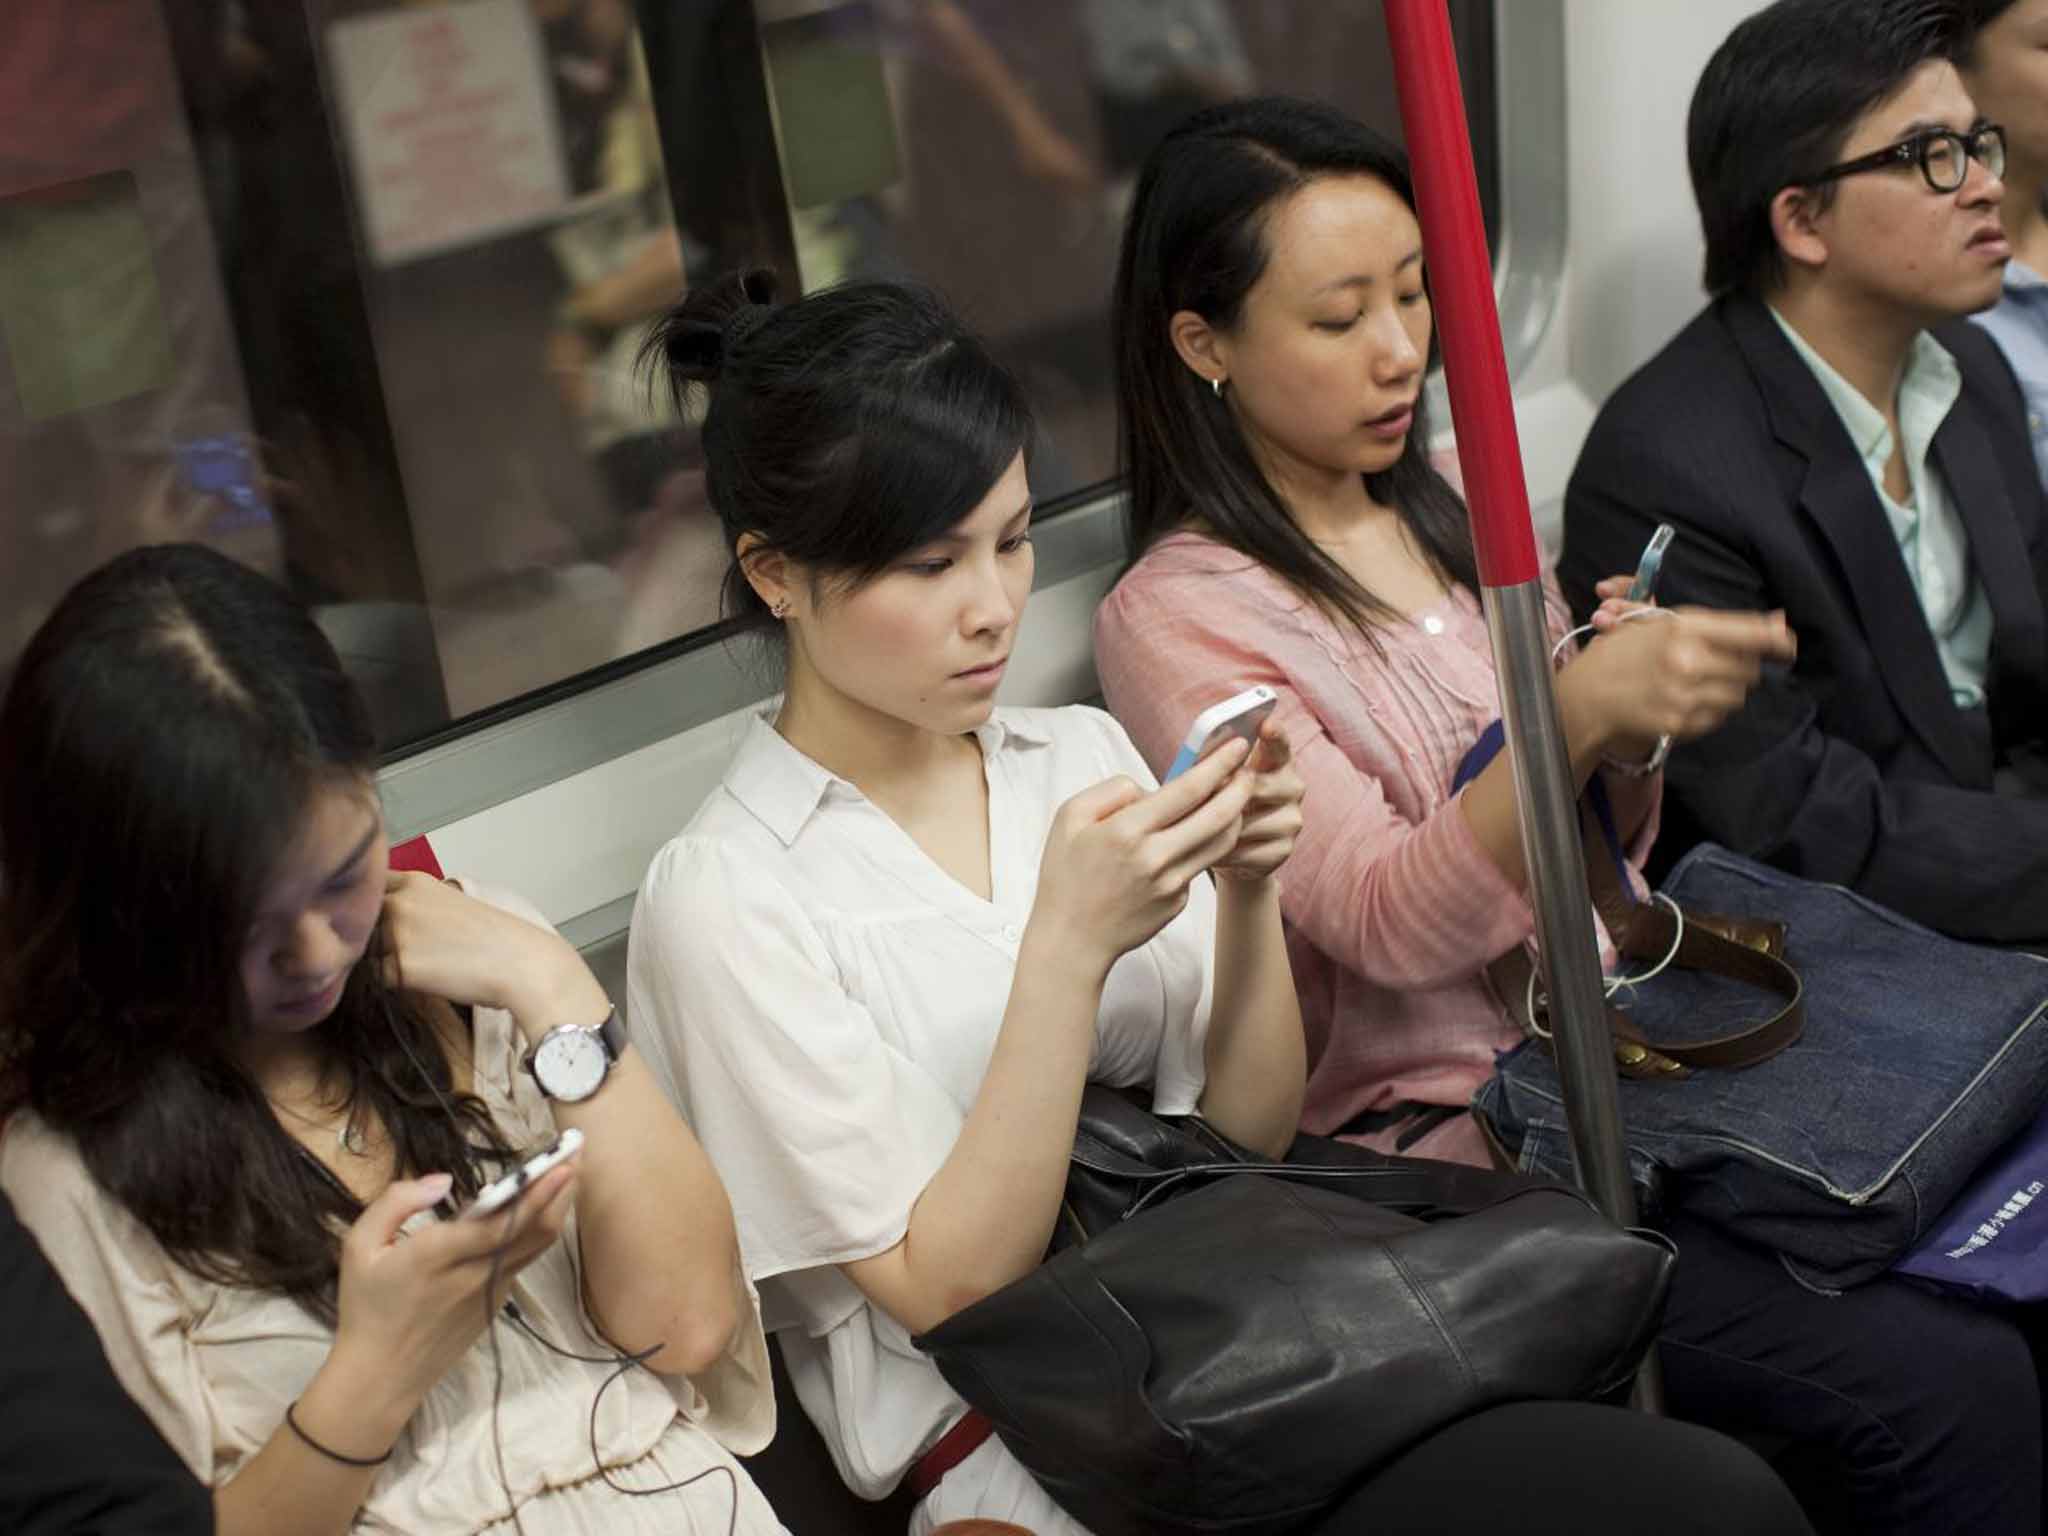 Social media users in China have developed phrases to outwit censors